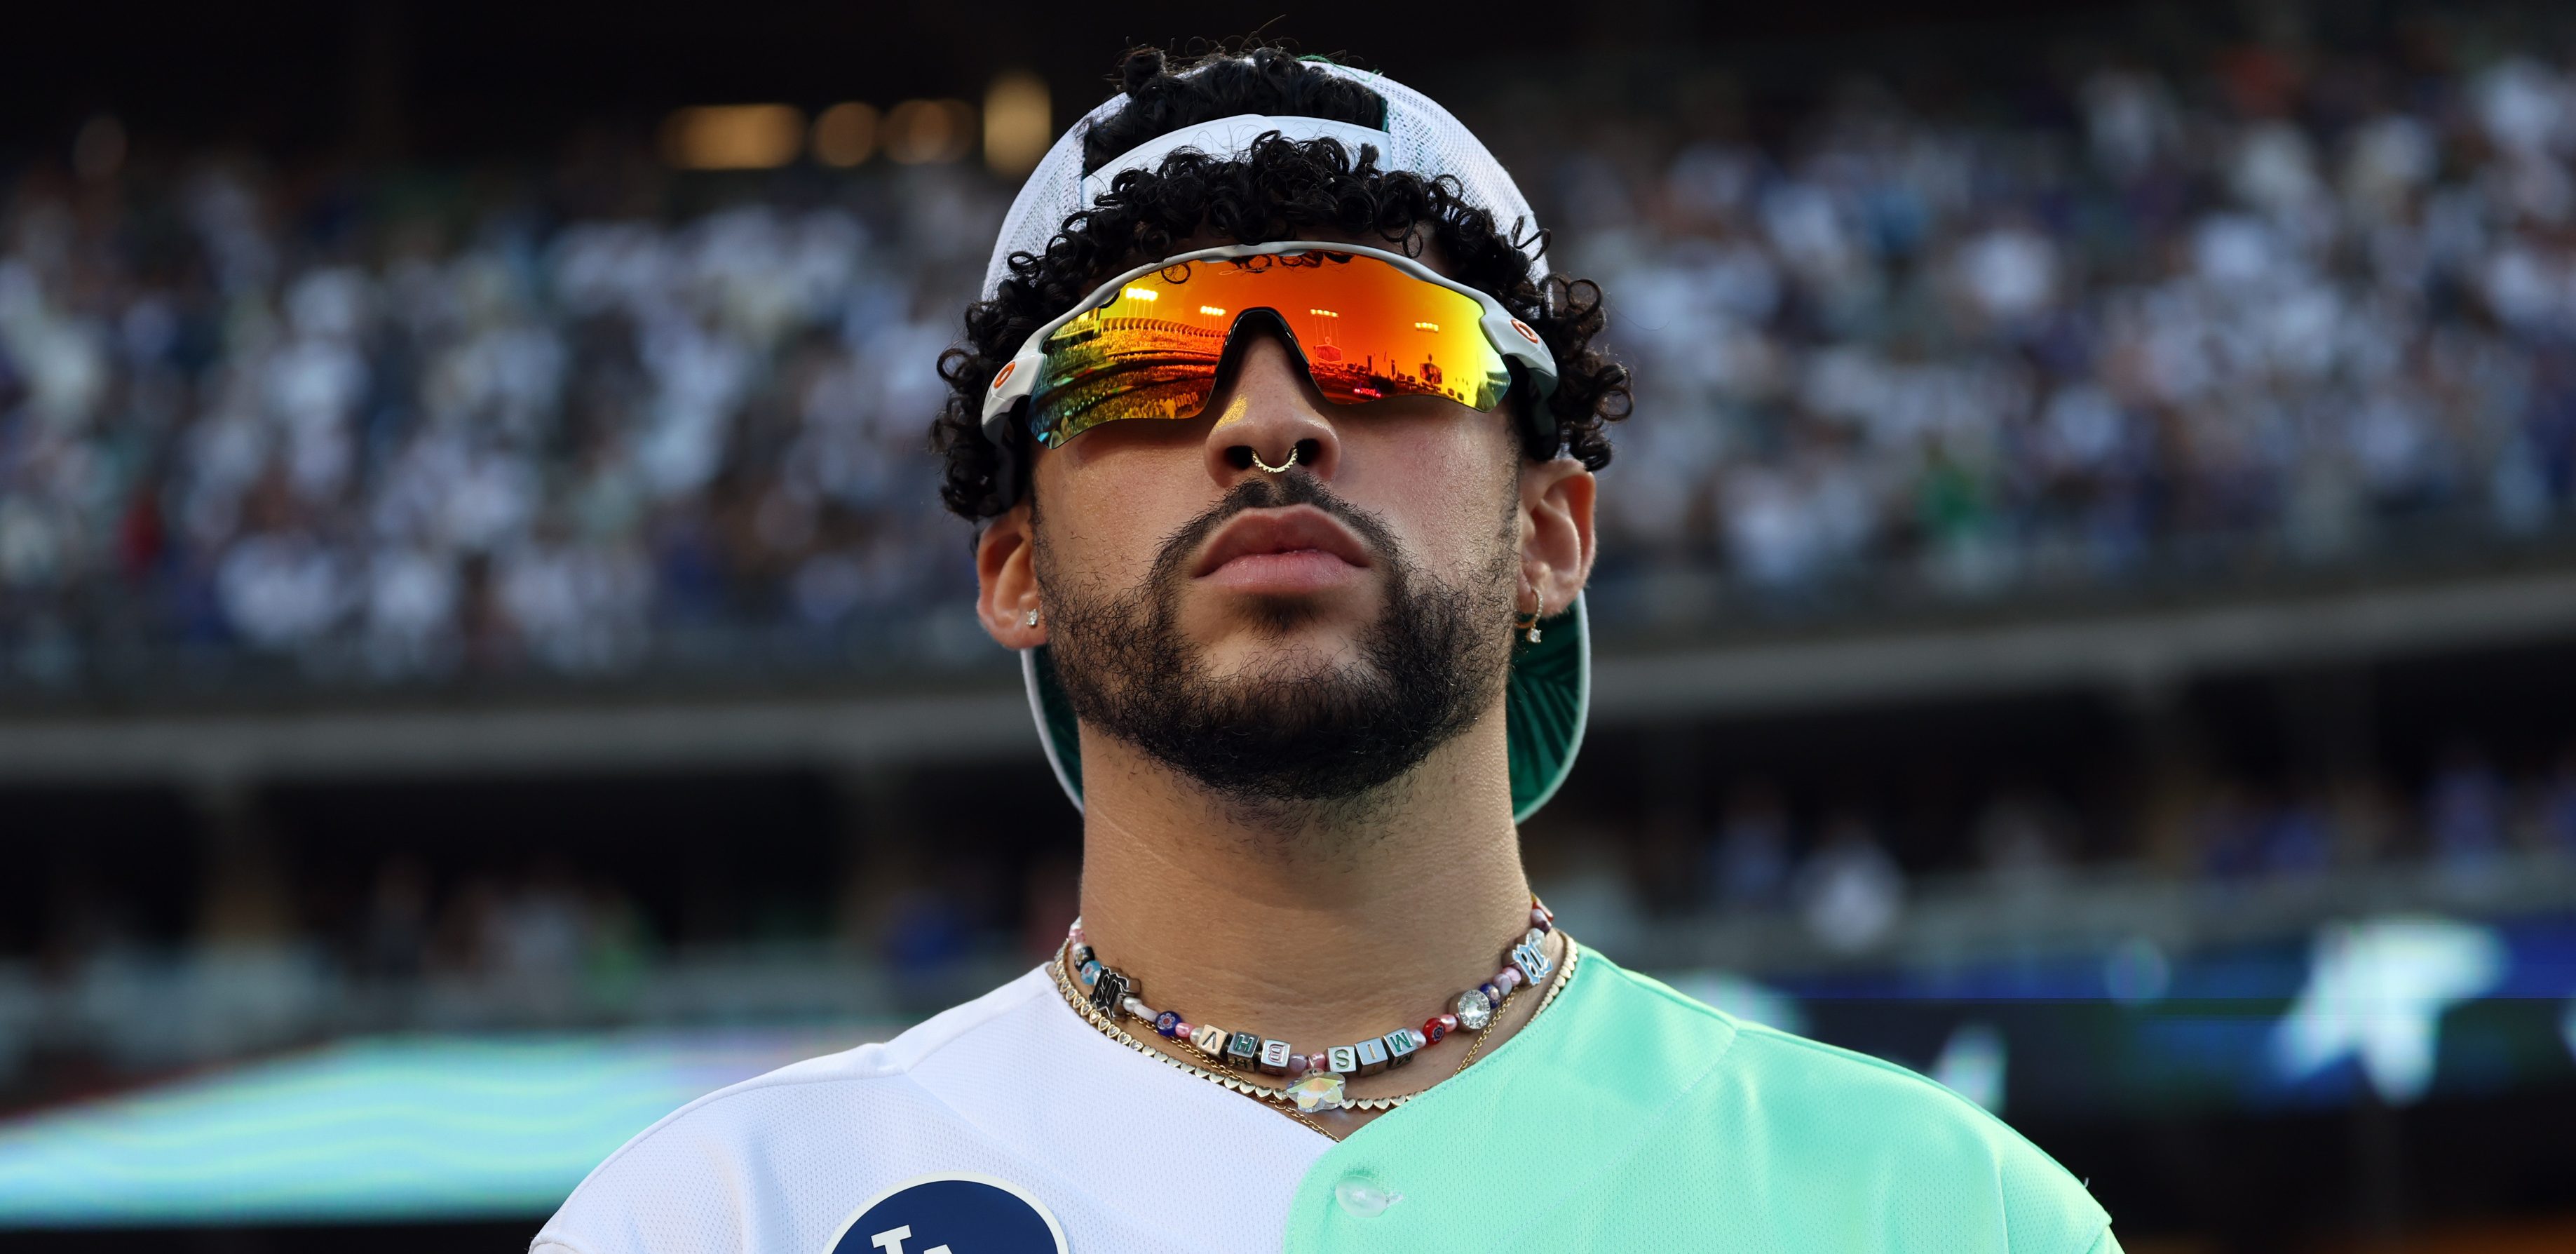 MLB players' union asks court to confirm arbitration decision against
Bad Bunny firm